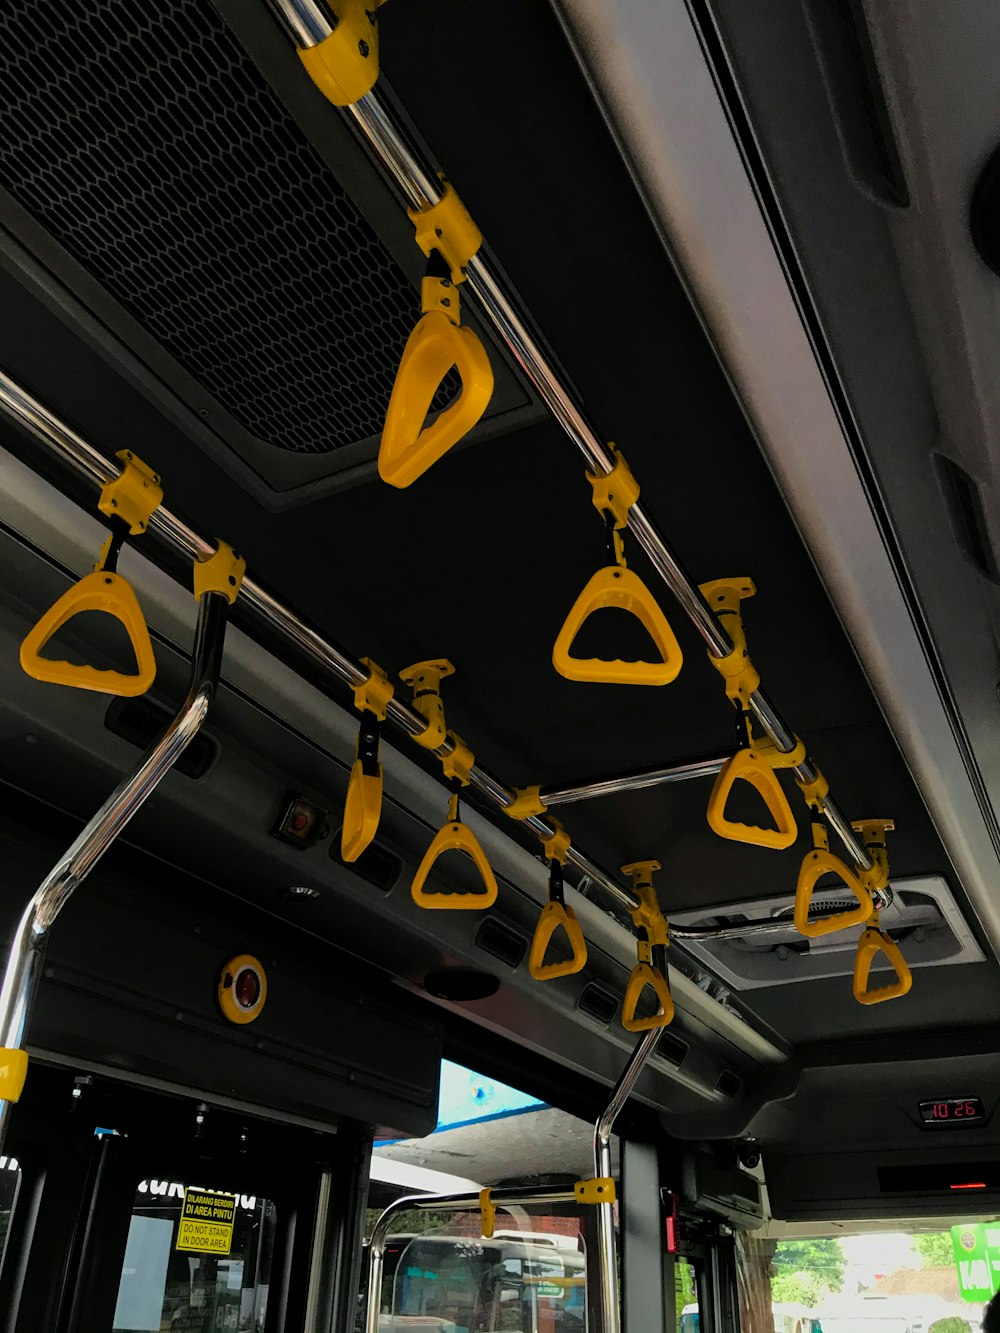 the interior of a public transit bus with yellow handrails